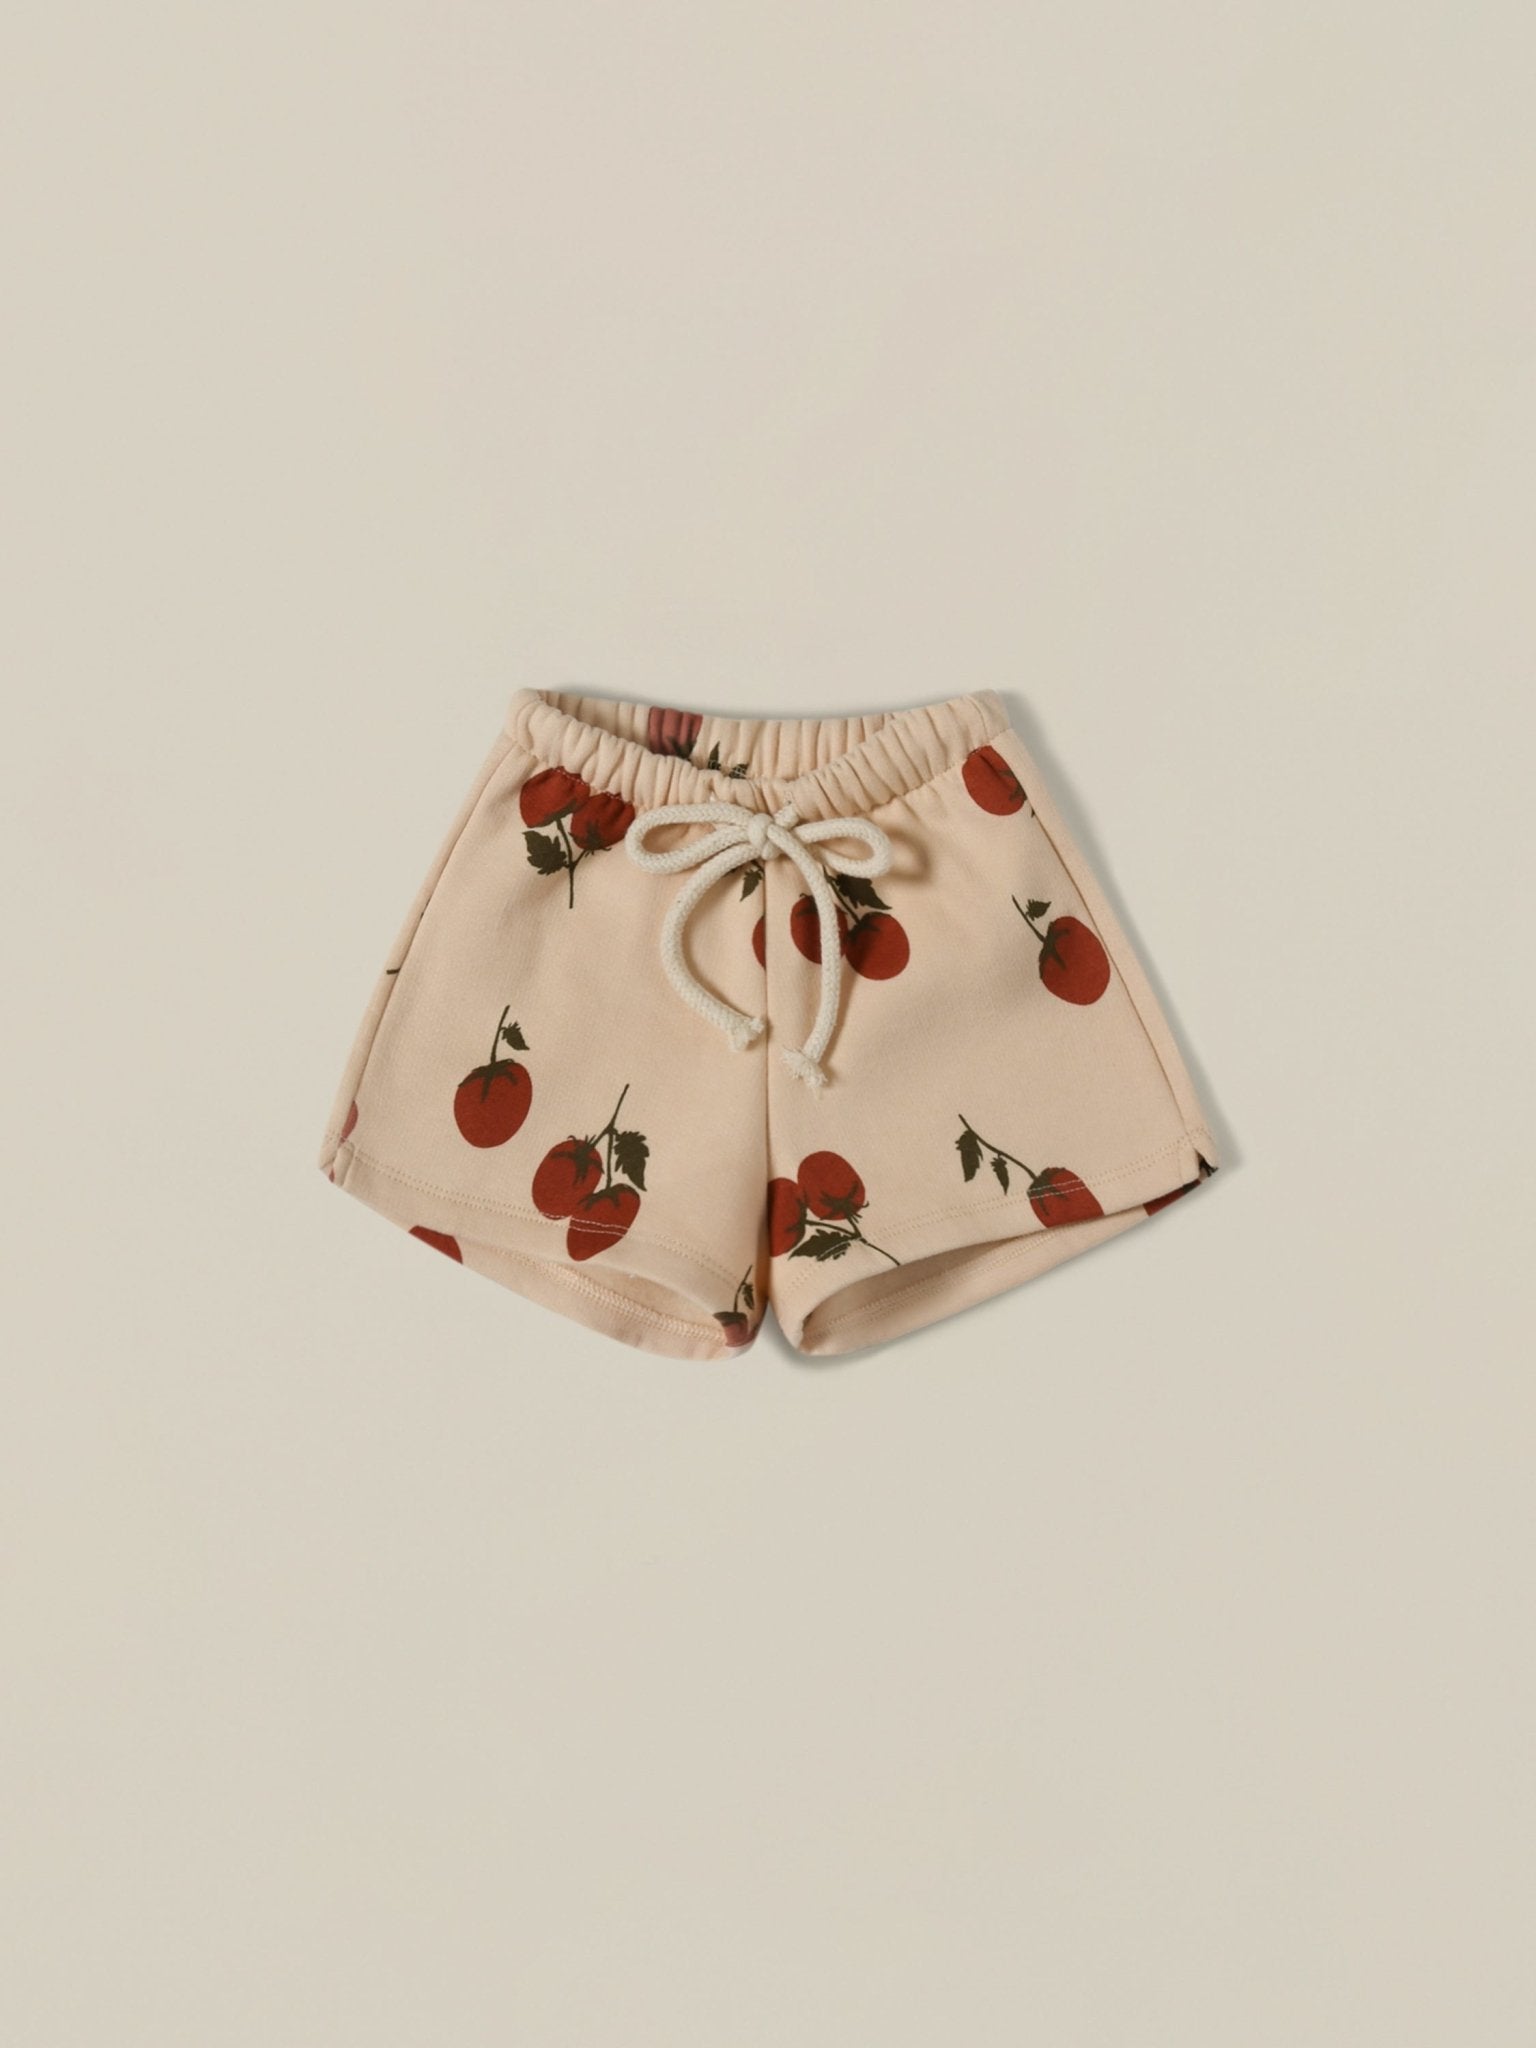 Rope Shorts by Organic Zoo - OAT & OCHRE | Slow Fashion, Organic, Ethically-Made